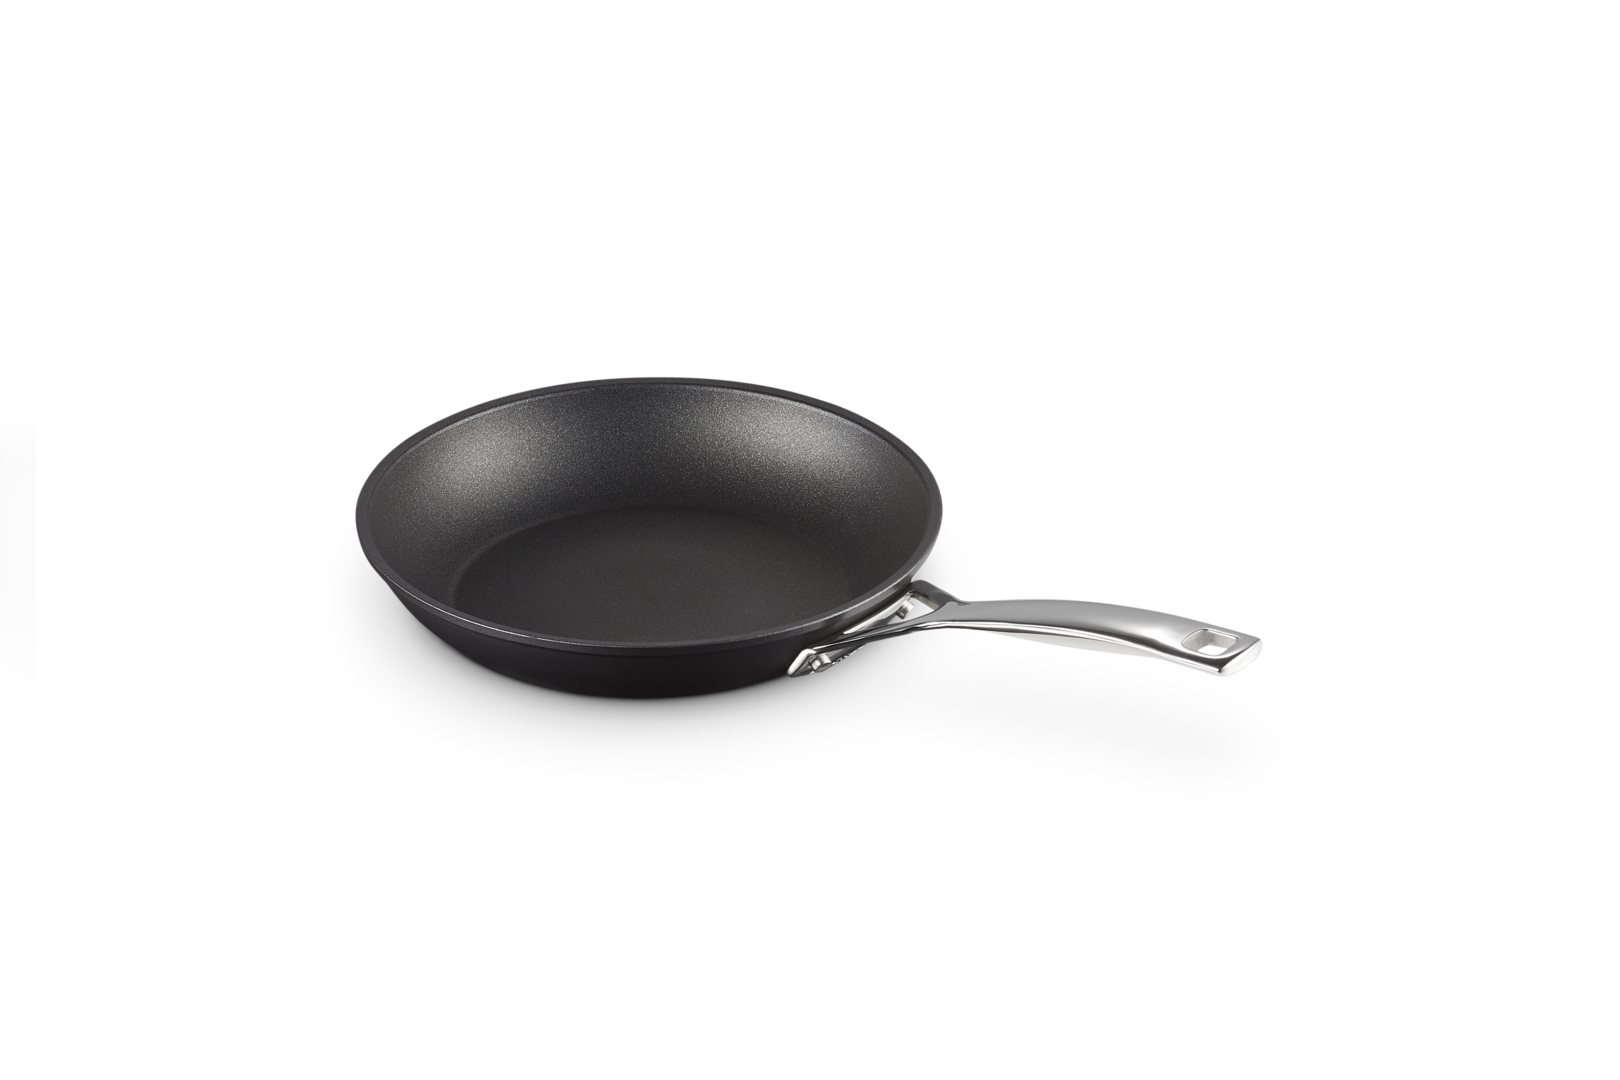 962020260 Ideal For Lower-fat Cooking On All Hob Types Including Induction Black Le Creuset Toughened Non-Stick Stir Fry Pan 26 cm 